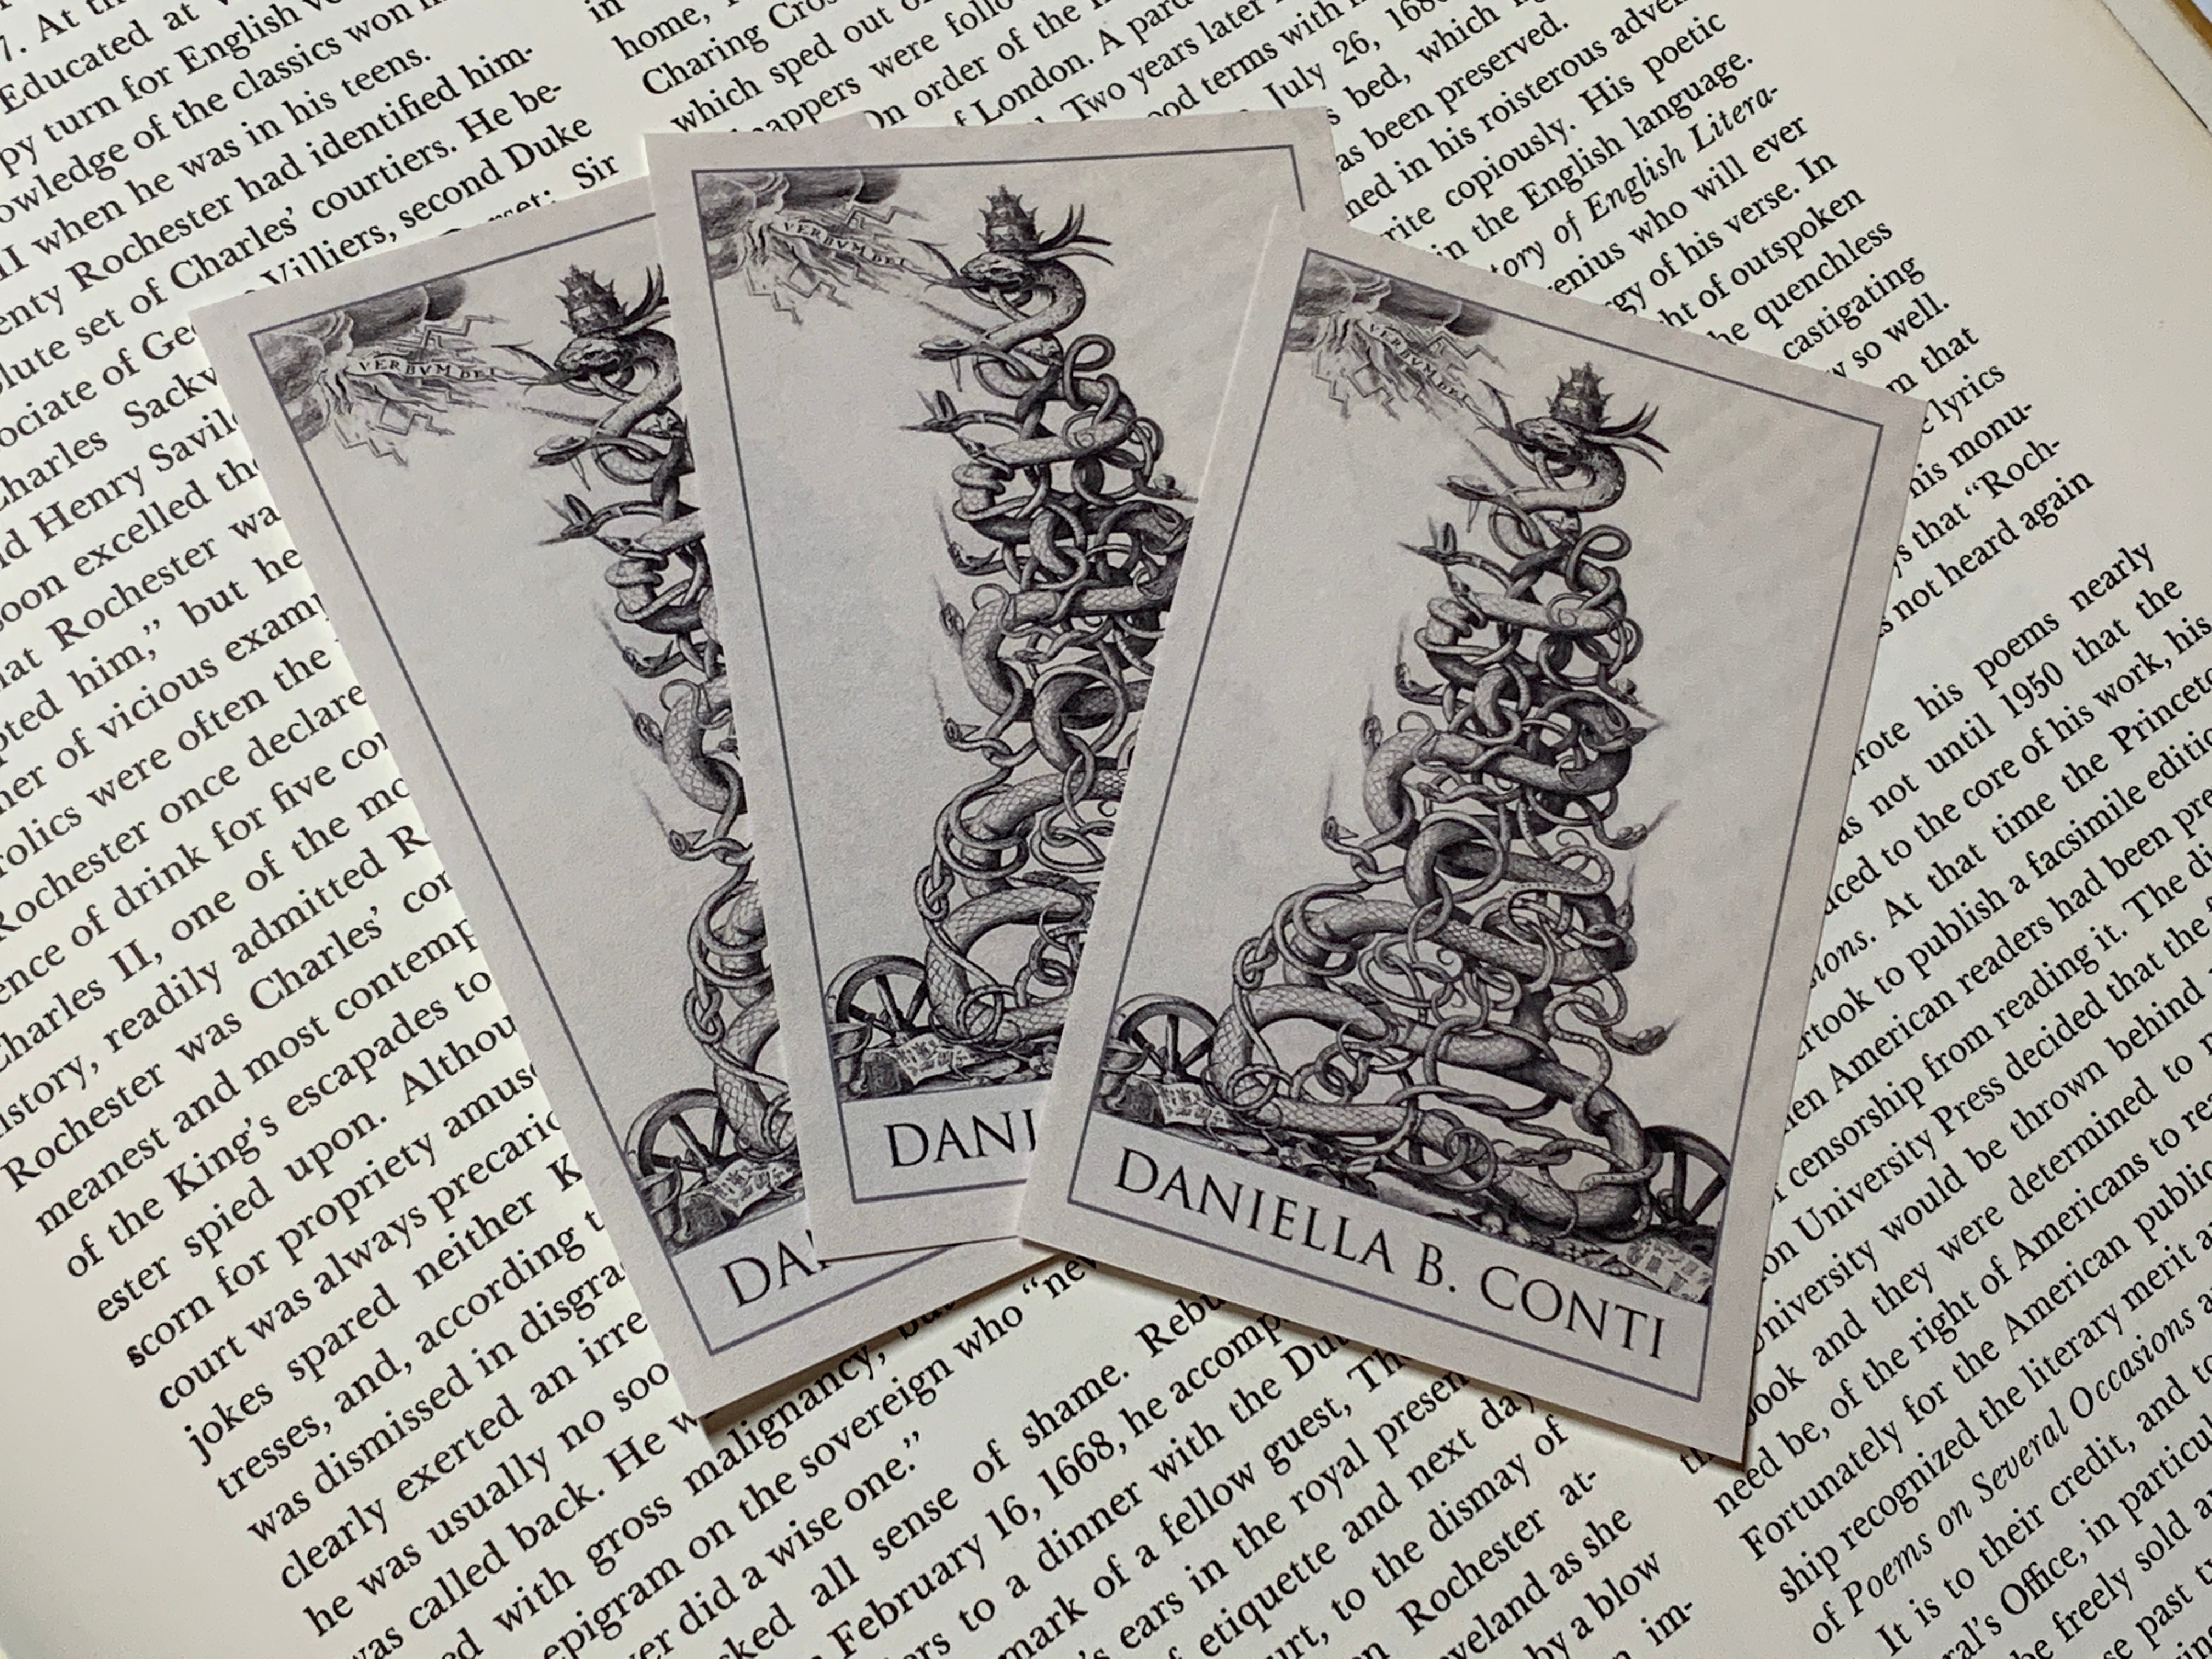 Snake Tower, Personalized Ex-Libris Bookplates, Crafted on Traditional Gummed Paper, 4in x 2.5in, Set of 30